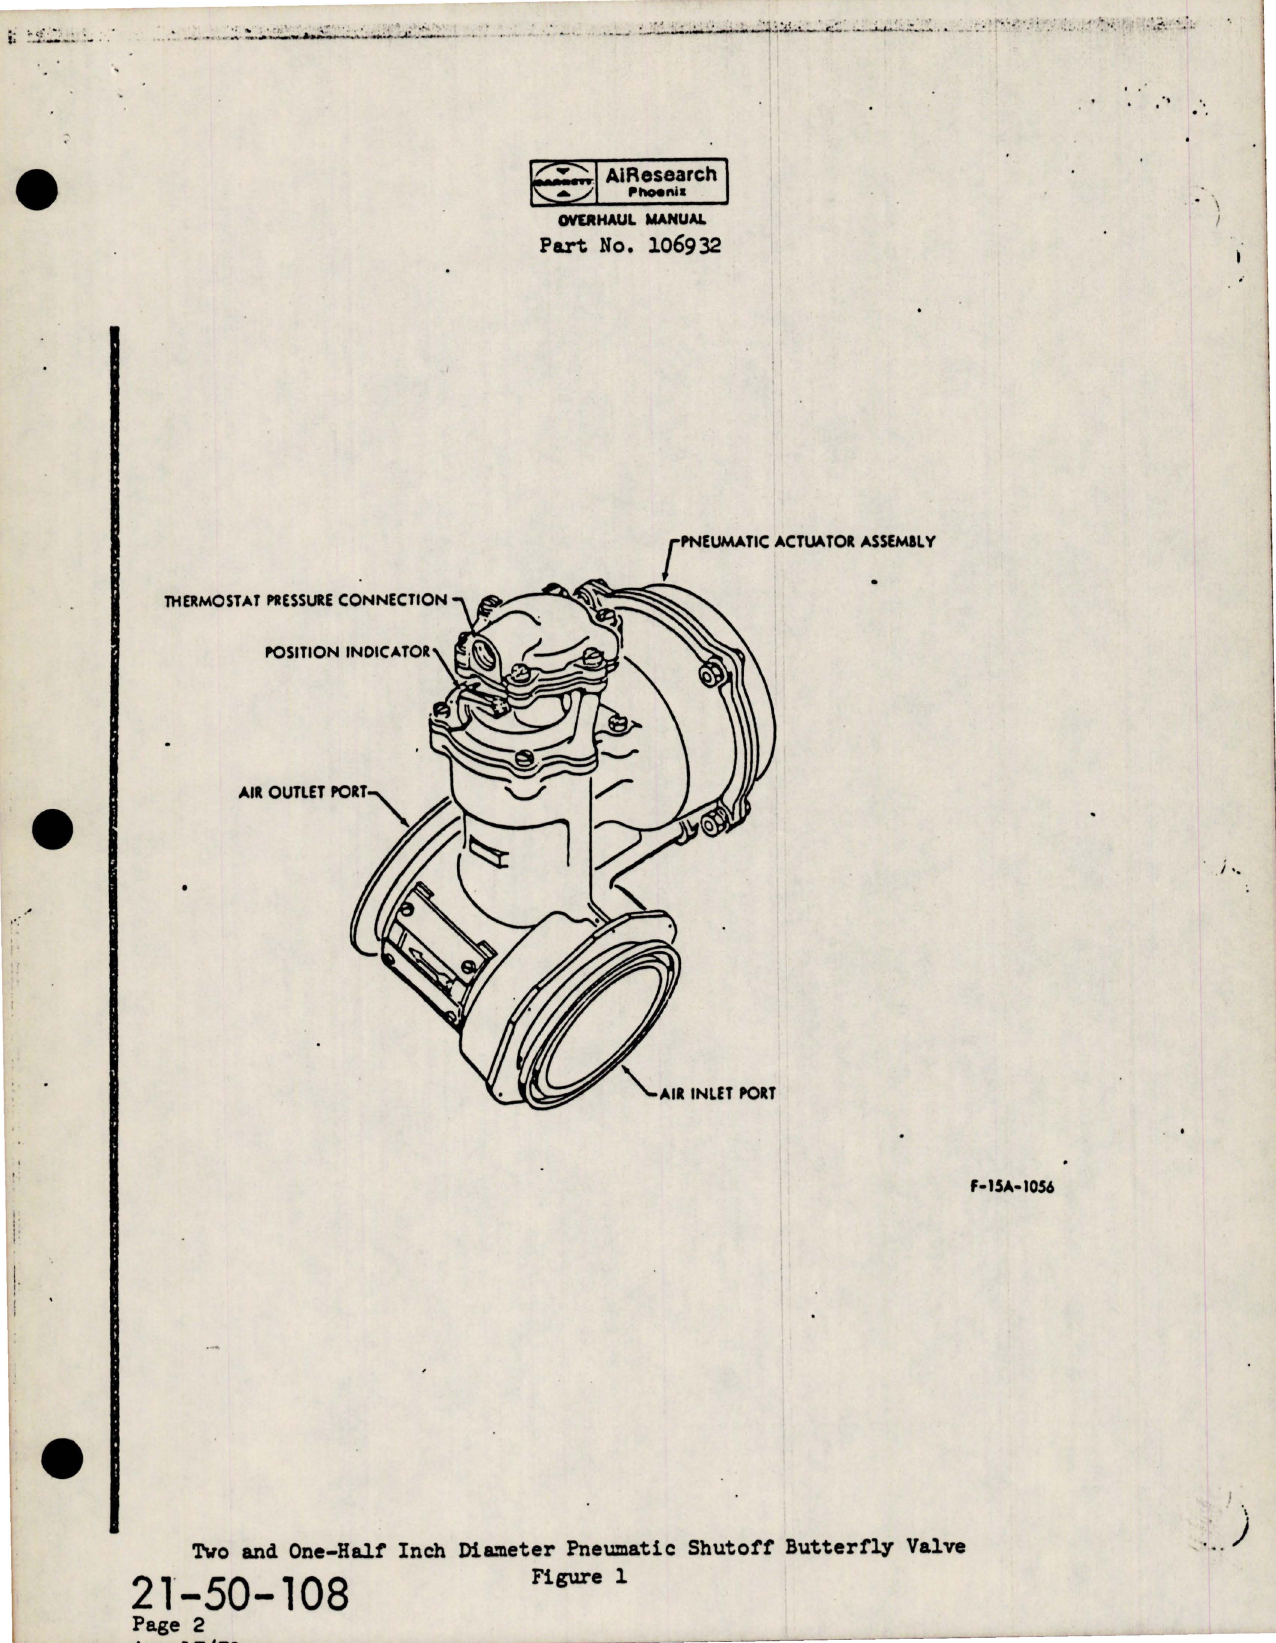 Sample page 9 from AirCorps Library document: Overhaul Manual for Pneumatic Shutoff Butterfly Valve - 2.5 inch Diameter - Part 106932-1-1 